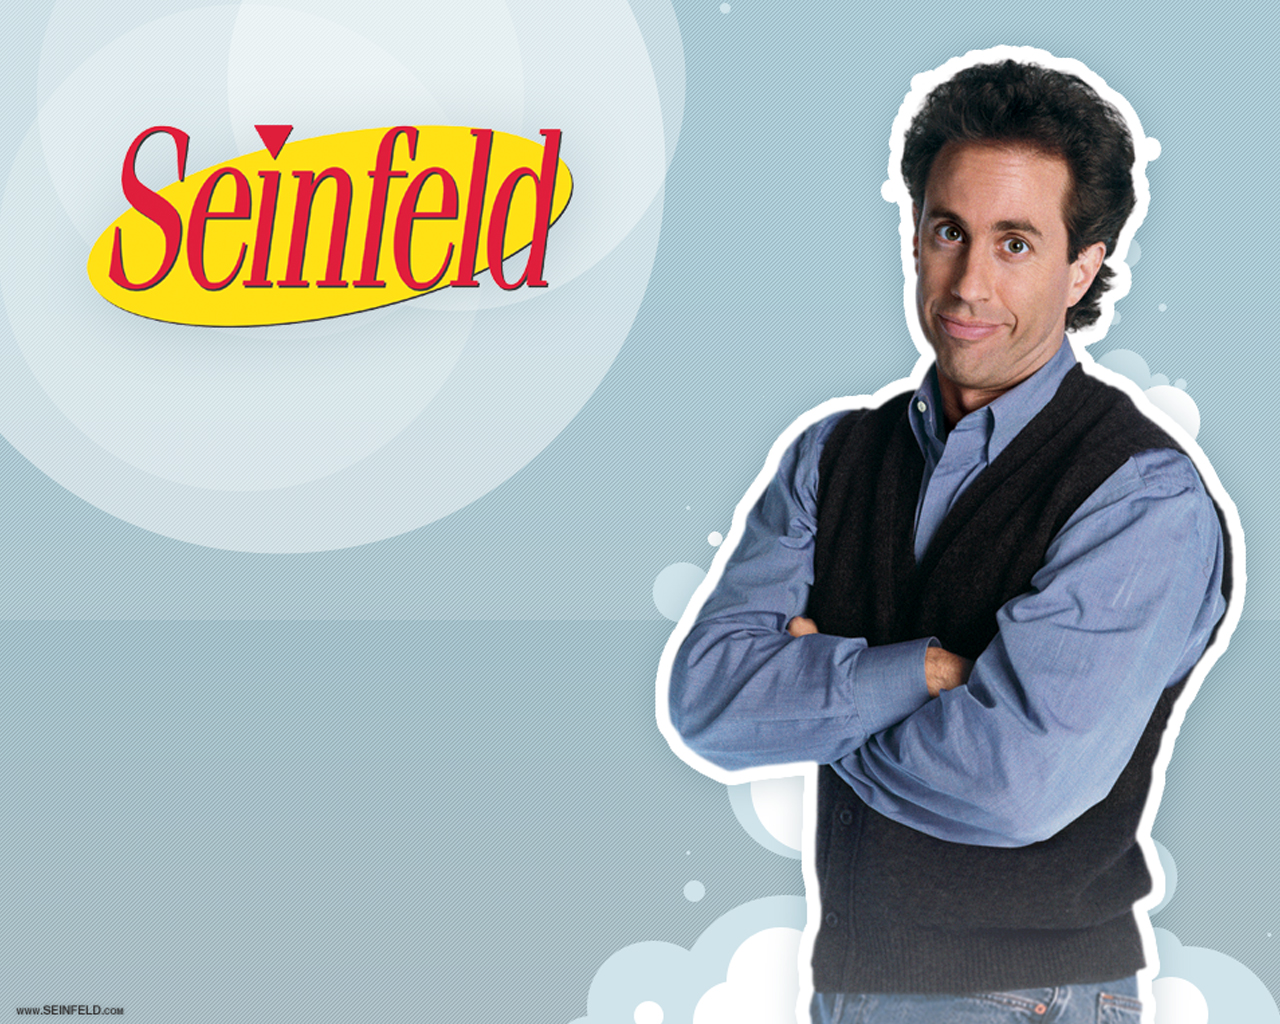 Seinfeld Free Desktop Wallpapers for HD, Widescreen and Mobile